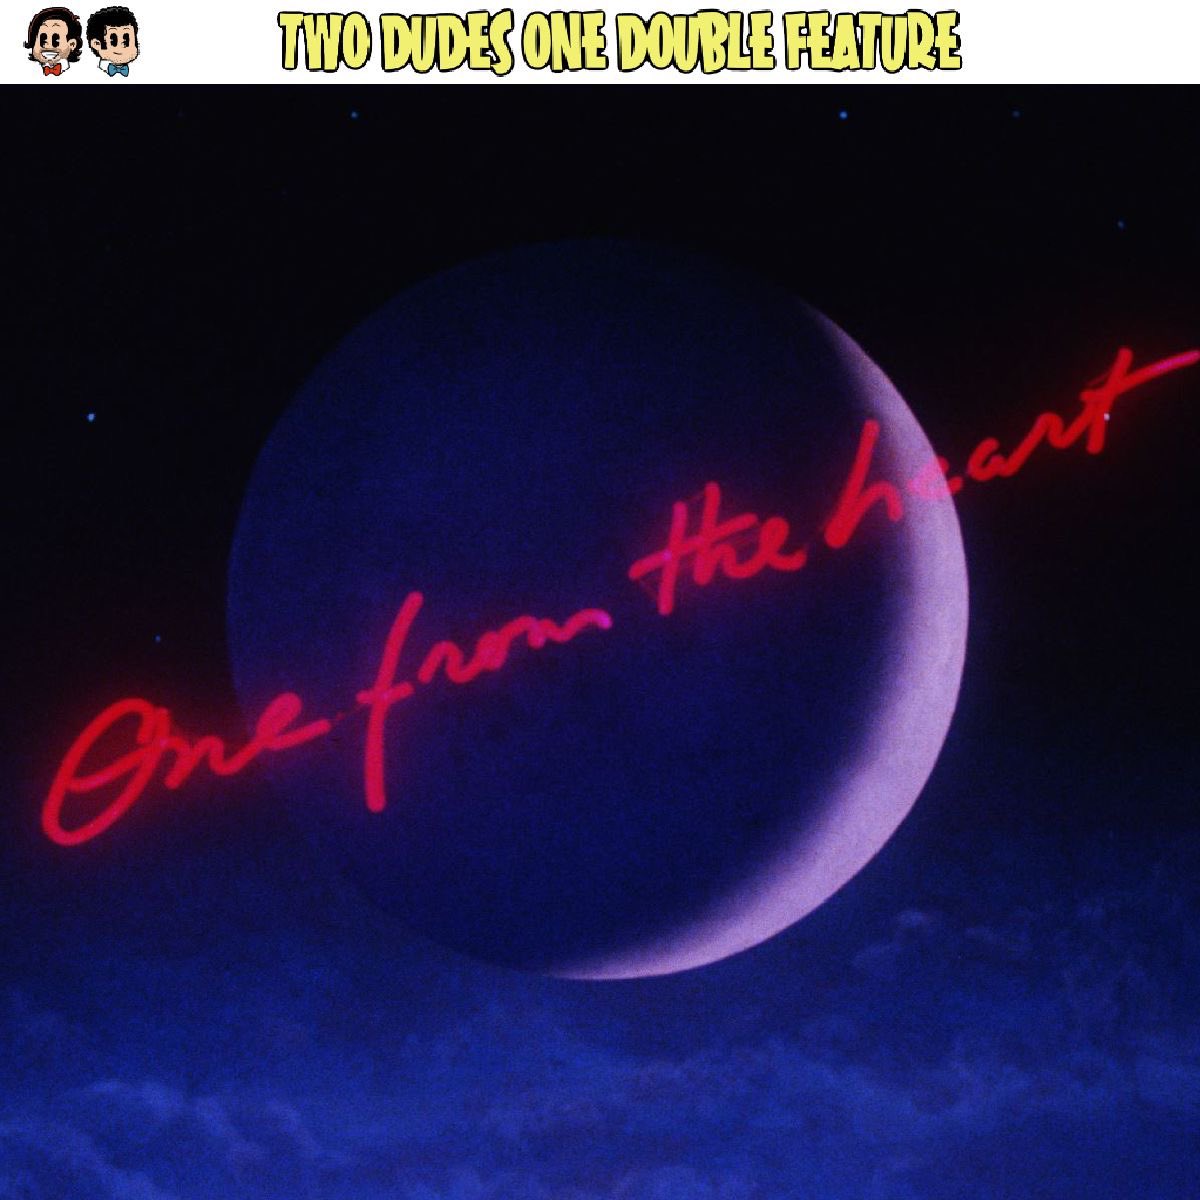 Our special presentation of Francis Ford Coppola’s film One From The Heart is now live! 

LINKS: linktr.ee/TwoDudesOneDou…

#onefromtheheart #francisfordcoppola #terigarr #rauljulia #tomwaits #podcast #moviepodcast #twodudesonedoublefeature